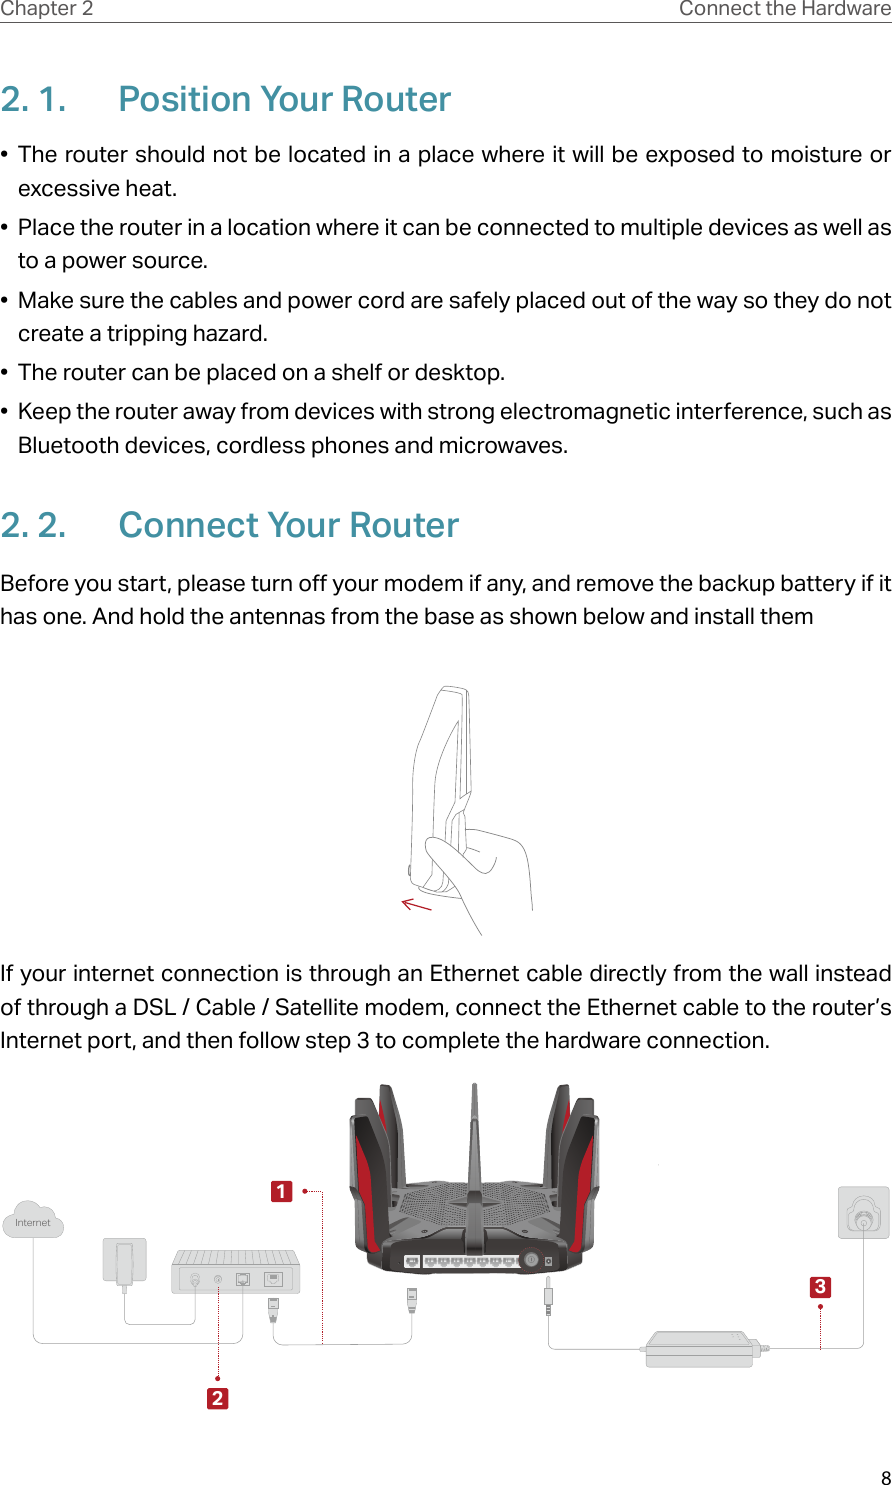 8Chapter 2 Connect the Hardware2. 1.  Position Your Router•  The router should not be located in a place where it will be exposed to moisture or excessive heat.•  Place the router in a location where it can be connected to multiple devices as well as to a power source.•  Make sure the cables and power cord are safely placed out of the way so they do not create a tripping hazard.•  The router can be placed on a shelf or desktop.•  Keep the router away from devices with strong electromagnetic interference, such as Bluetooth devices, cordless phones and microwaves.2. 2.  Connect Your RouterBefore you start, please turn off your modem if any, and remove the backup battery if it has one. And hold the antennas from the base as shown below and install themIf your internet connection is through an Ethernet cable directly from the wall instead of through a DSL / Cable / Satellite modem, connect the Ethernet cable to the router’s Internet port, and then follow step 3 to complete the hardware connection.Internet132